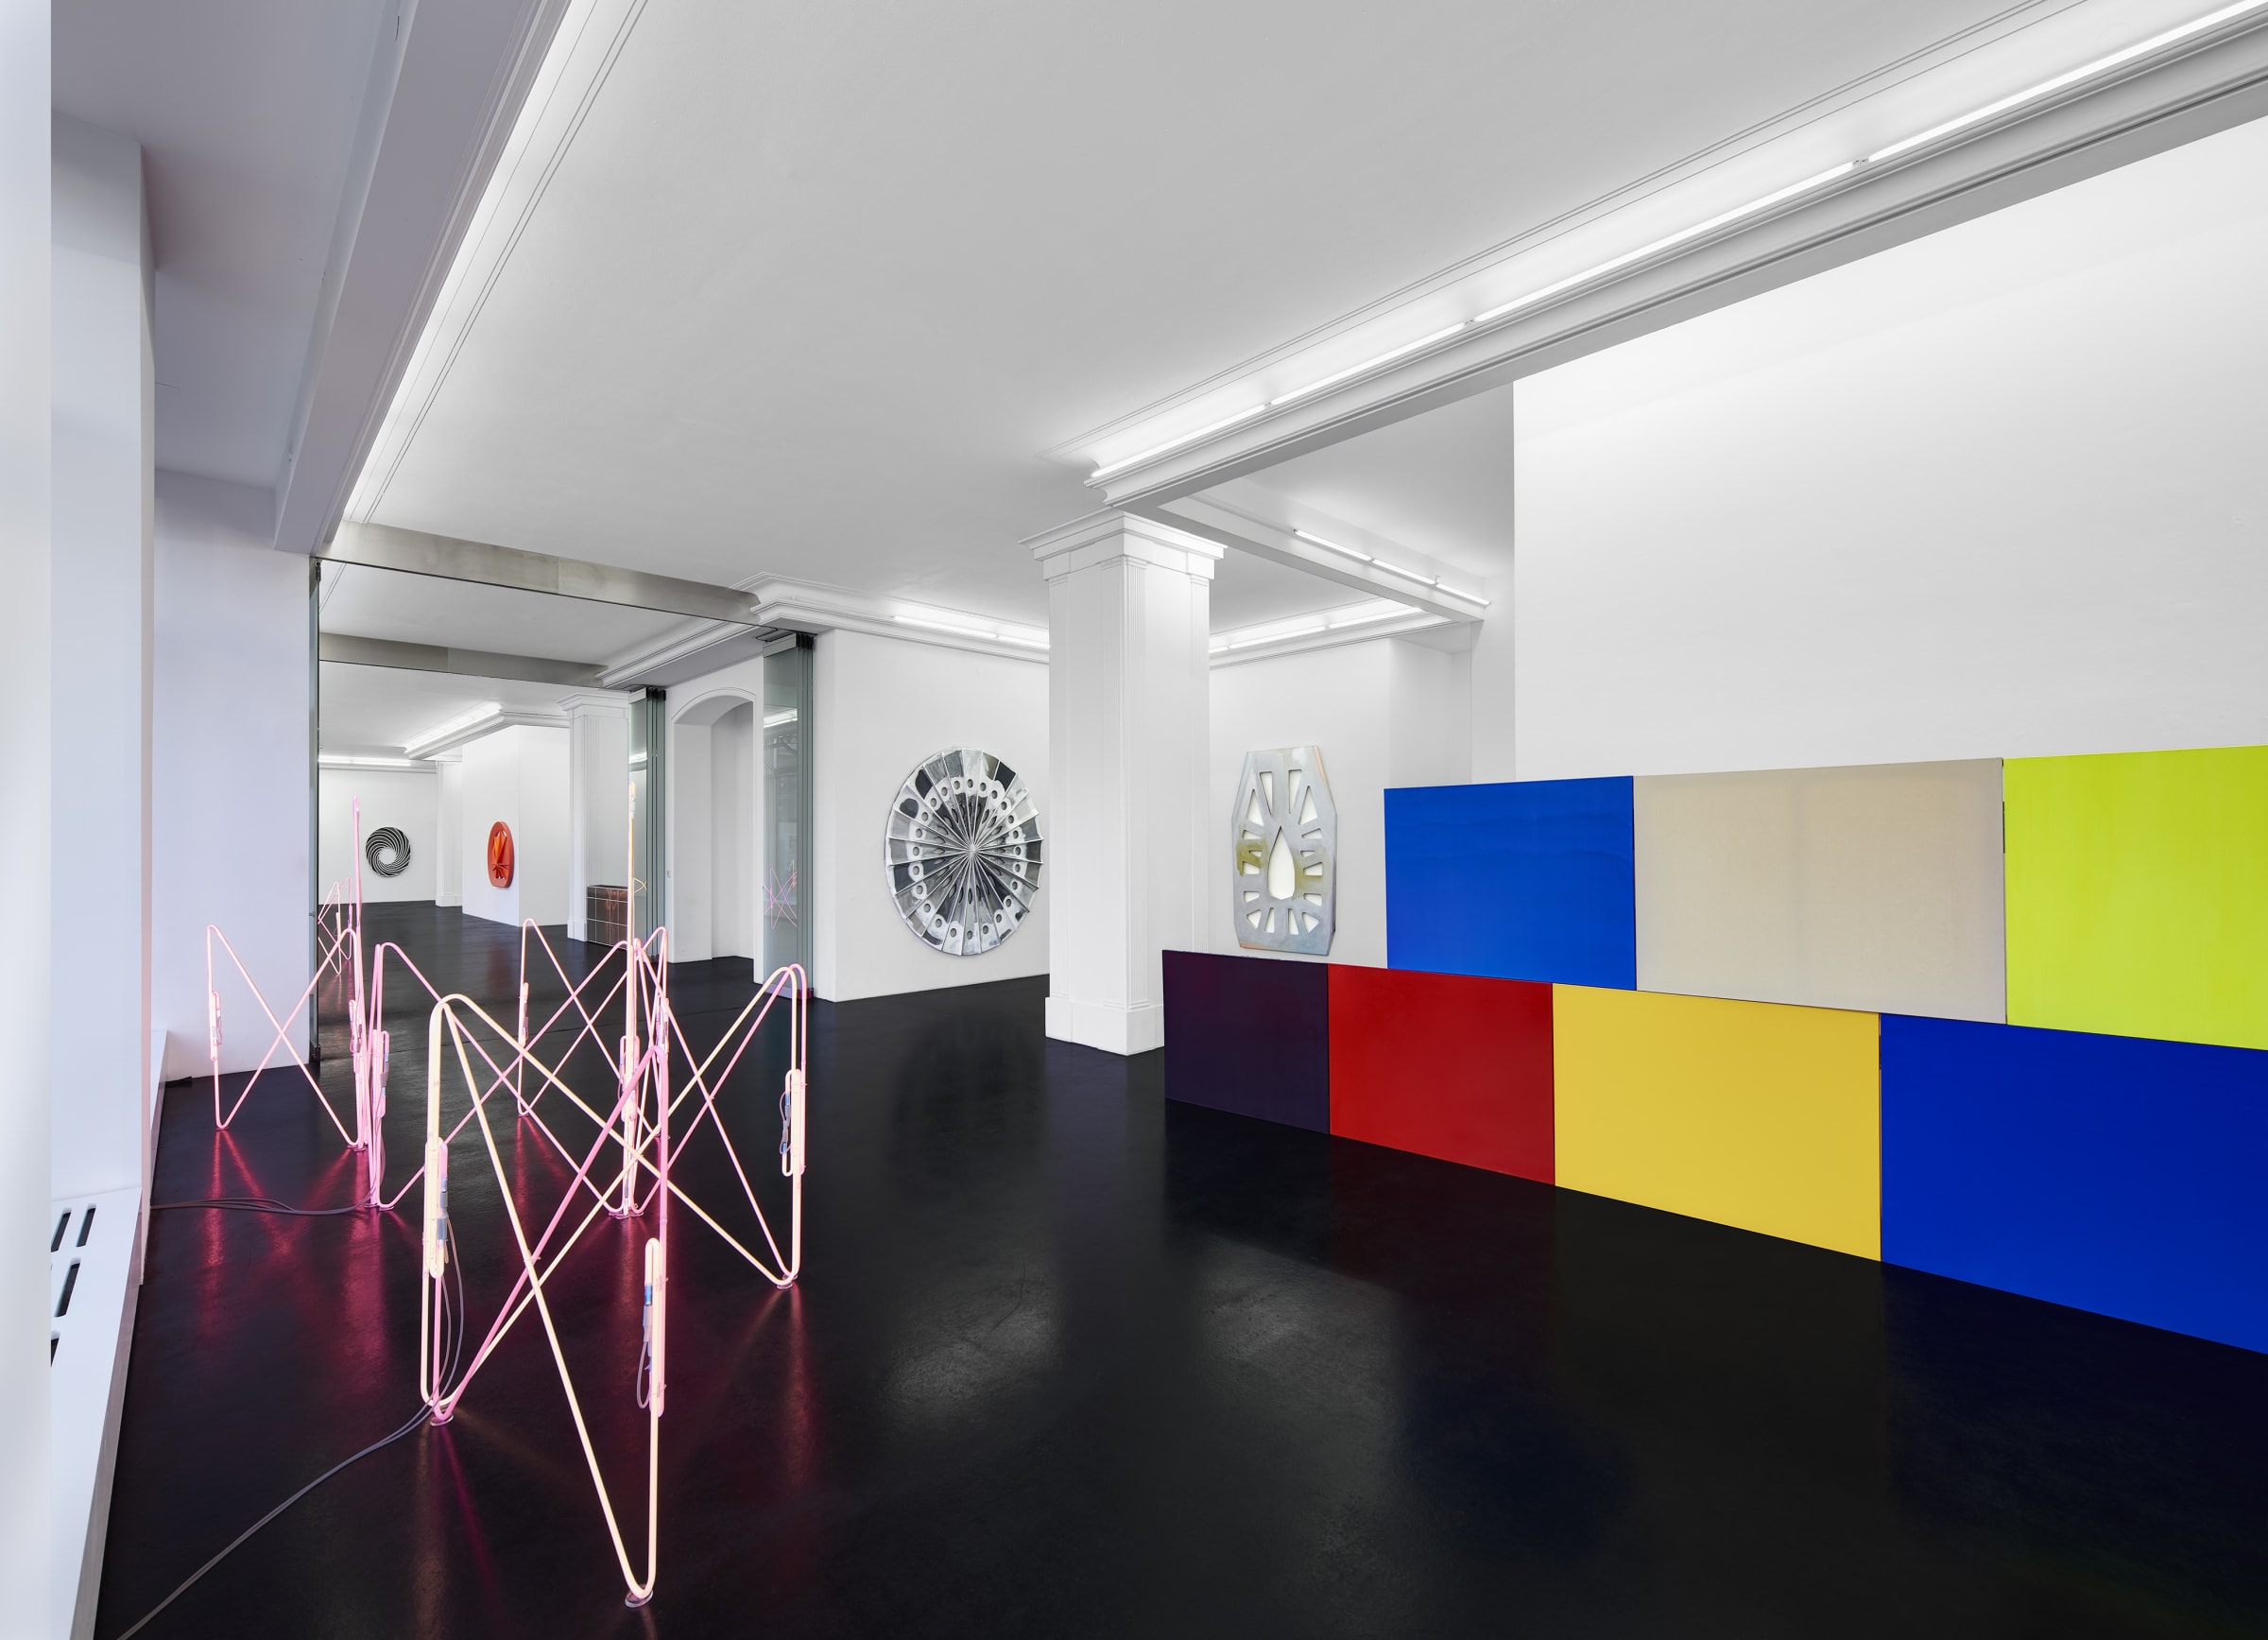 Blair Thurman Exquisite Course Installation View November 16 - December 21, 2018 Peres Projects, Berlin Photographed by: Matthias Kolb, Jacob...